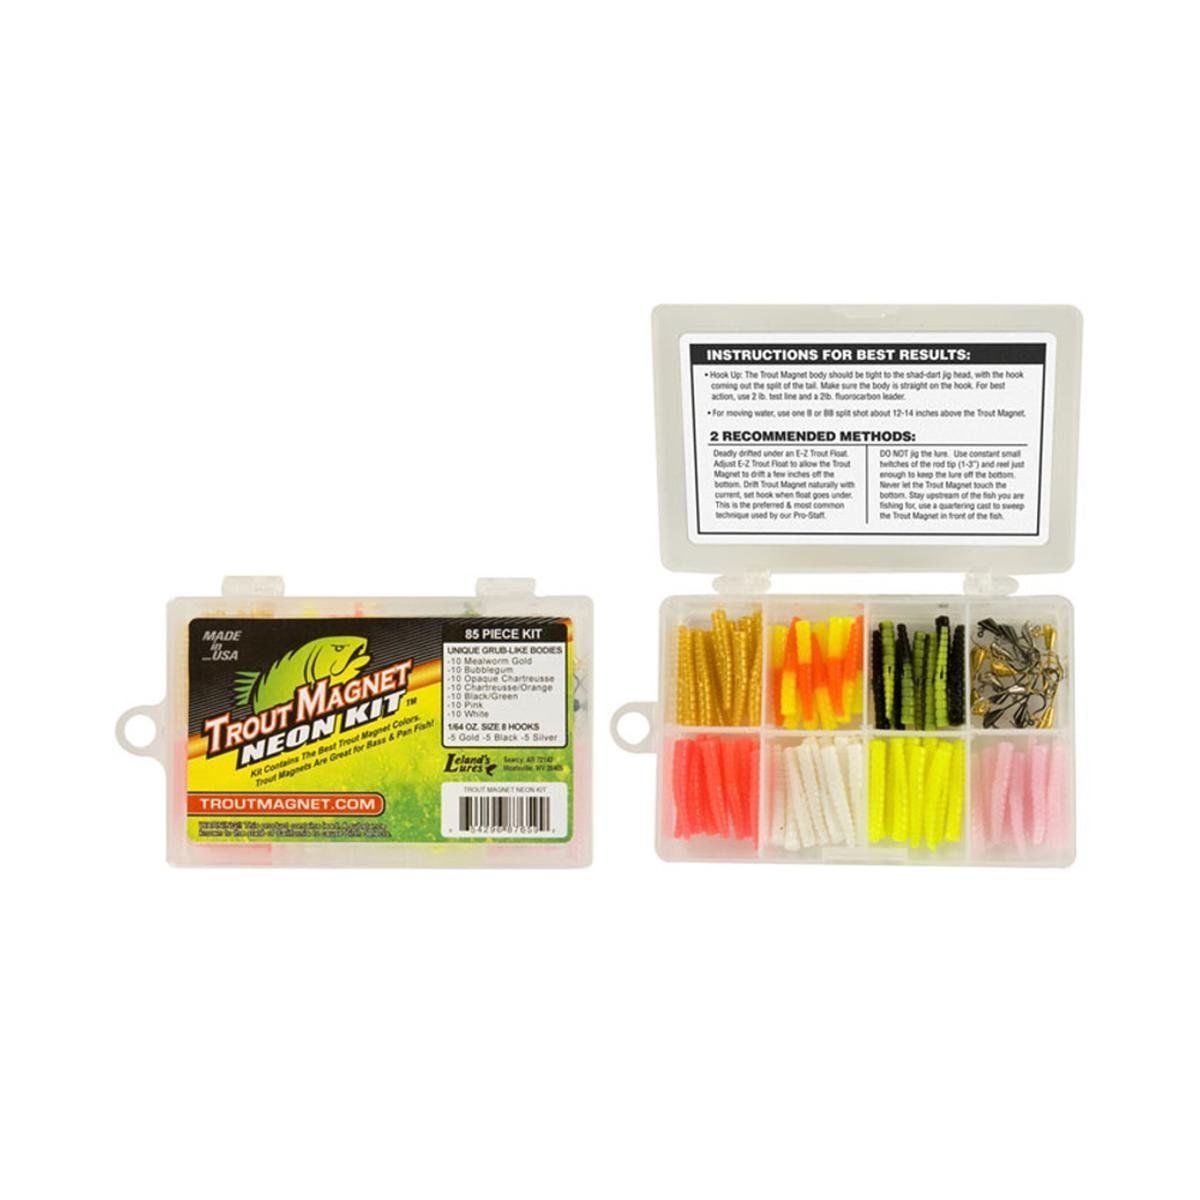 Leland Trout Magnet Kit & Grubs Shad Darts NEON KIT -85 Piece Made in